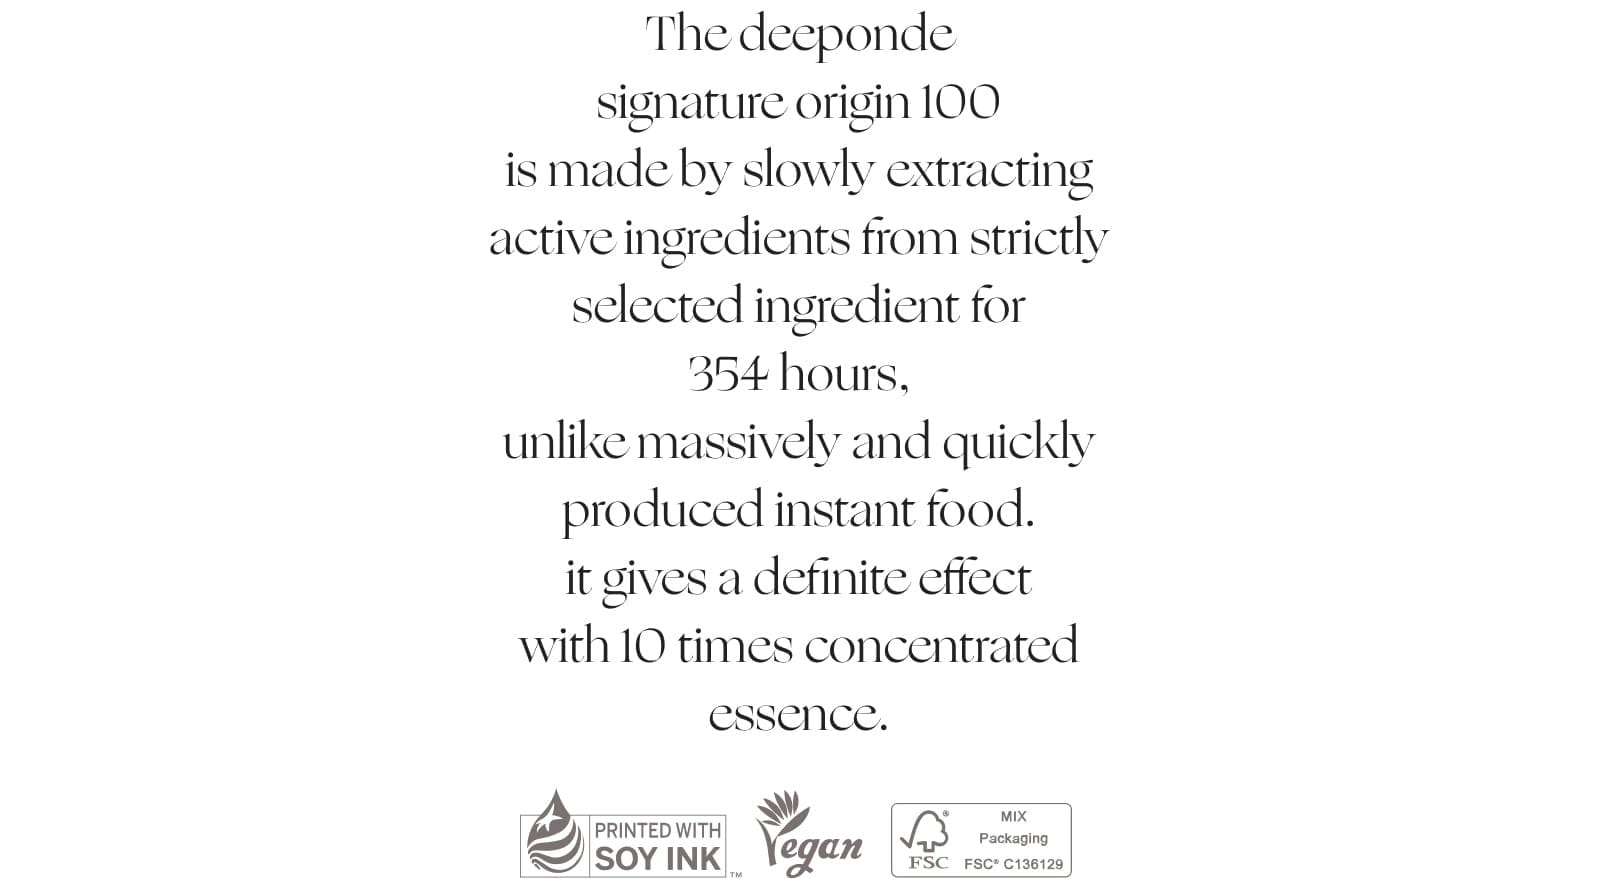 The deeponde signature origin 100 is made by slowly extracting active ingredients from strictly selected ingredient for 354 hours, unlike massively and quickly produced instant food. it gives a definite effect with 10 times concentrated essence.